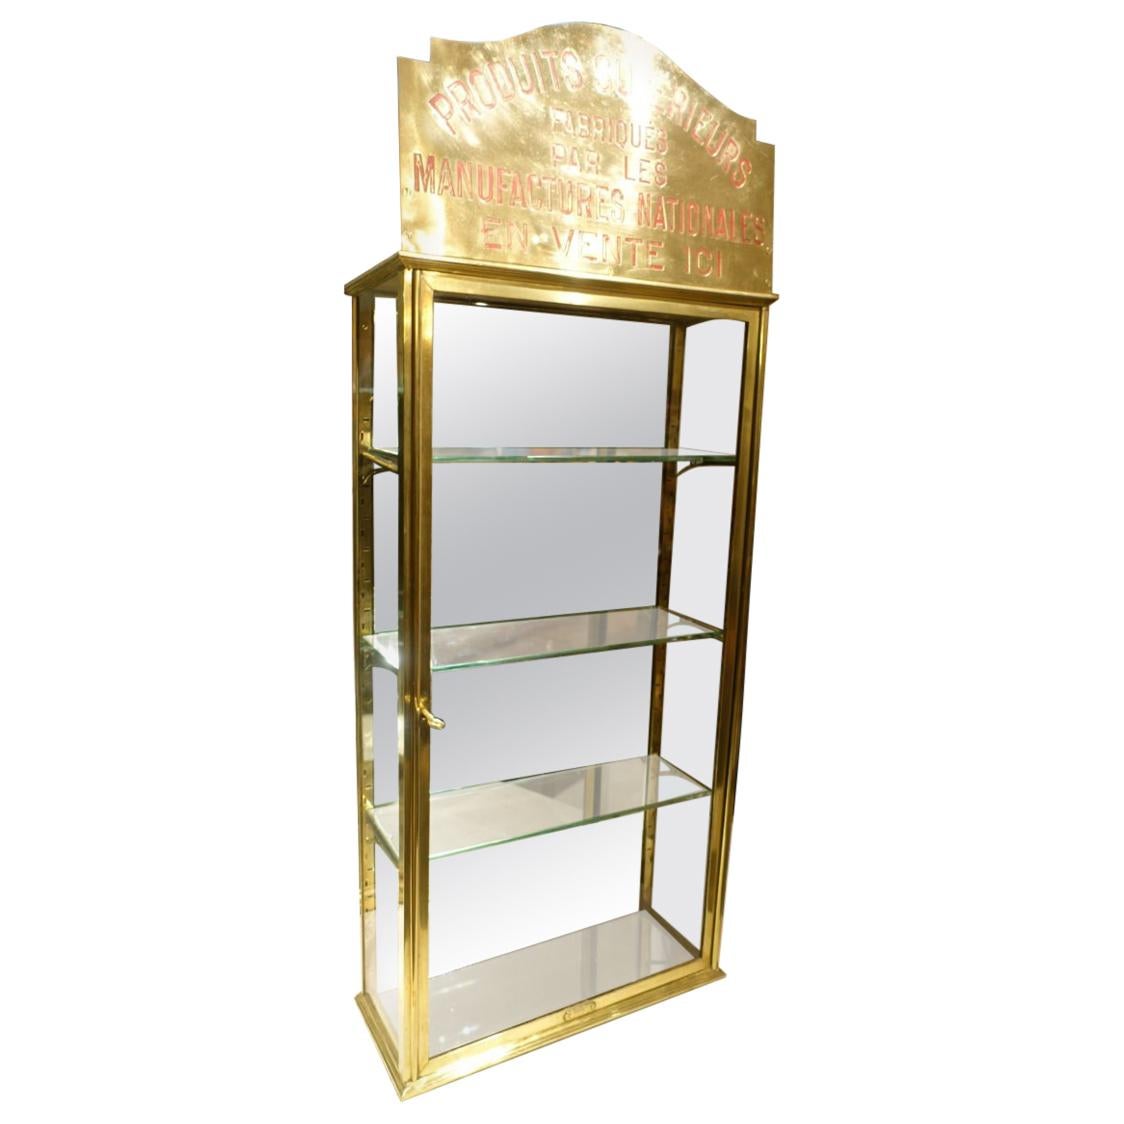 French Brass Wall Display Cabinet, Early 1900s